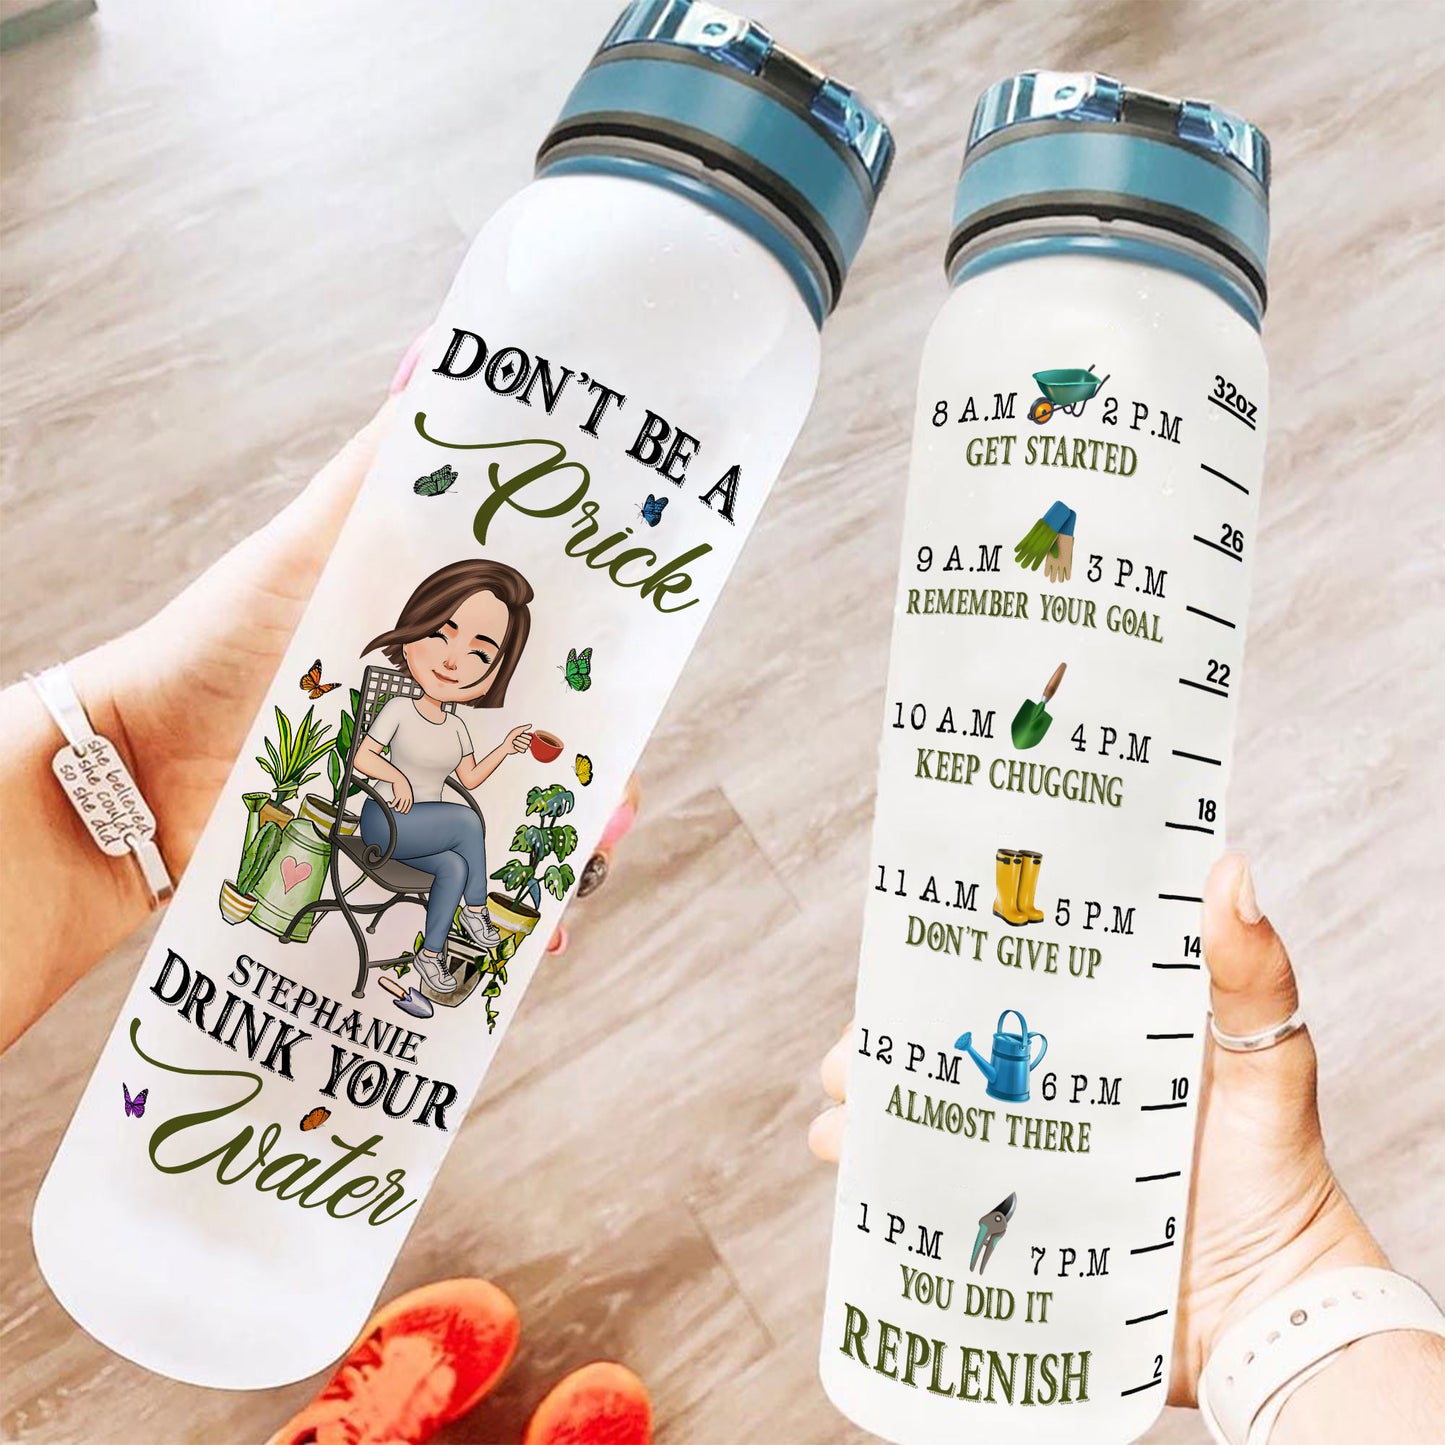 Don't Be A Prick Drink Your Water - Personalized Water Tracker Bottle - Birthday, Funny Gift For Her, Woman, Girl, Gardening Lover